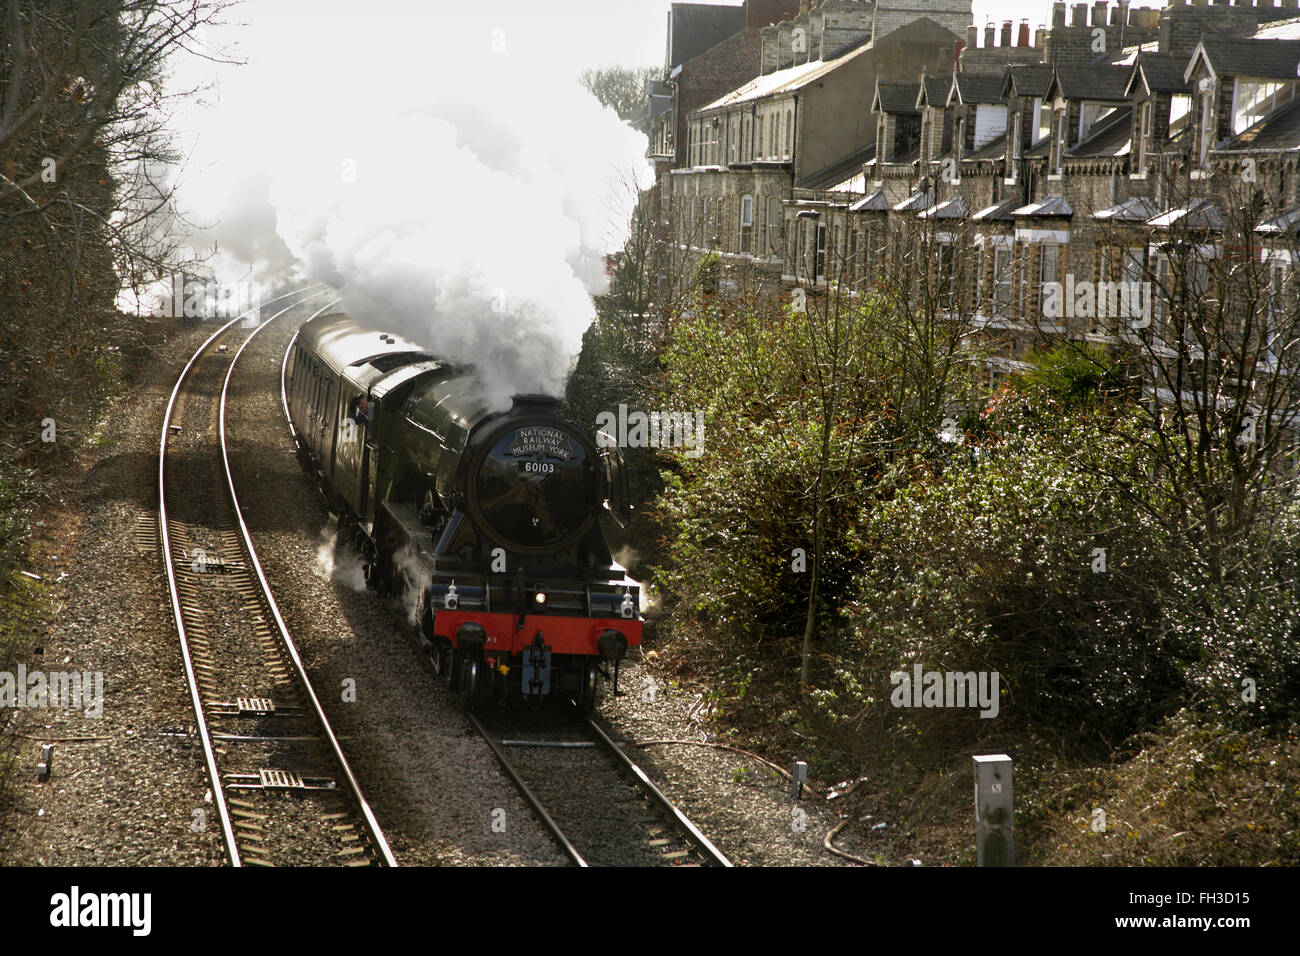 York, UK. 23rd February, 2016. Newly restored LNER A3 class locomotive “Flying Scotsman” leaves York on its way to Scarborough on a final test run before its inaugural comeback journey from London King's Cross to York on Thursday 25 February. The locomotive, owned by the National Railway Museum (NRM), has been fully restored at a cost of £4.2 million and in addition to featuring in a new exhibition at the NRM's York location will be hauling special trains throughout the UK in the coming months. Credit:  david soulsby/Alamy Live News Stock Photo